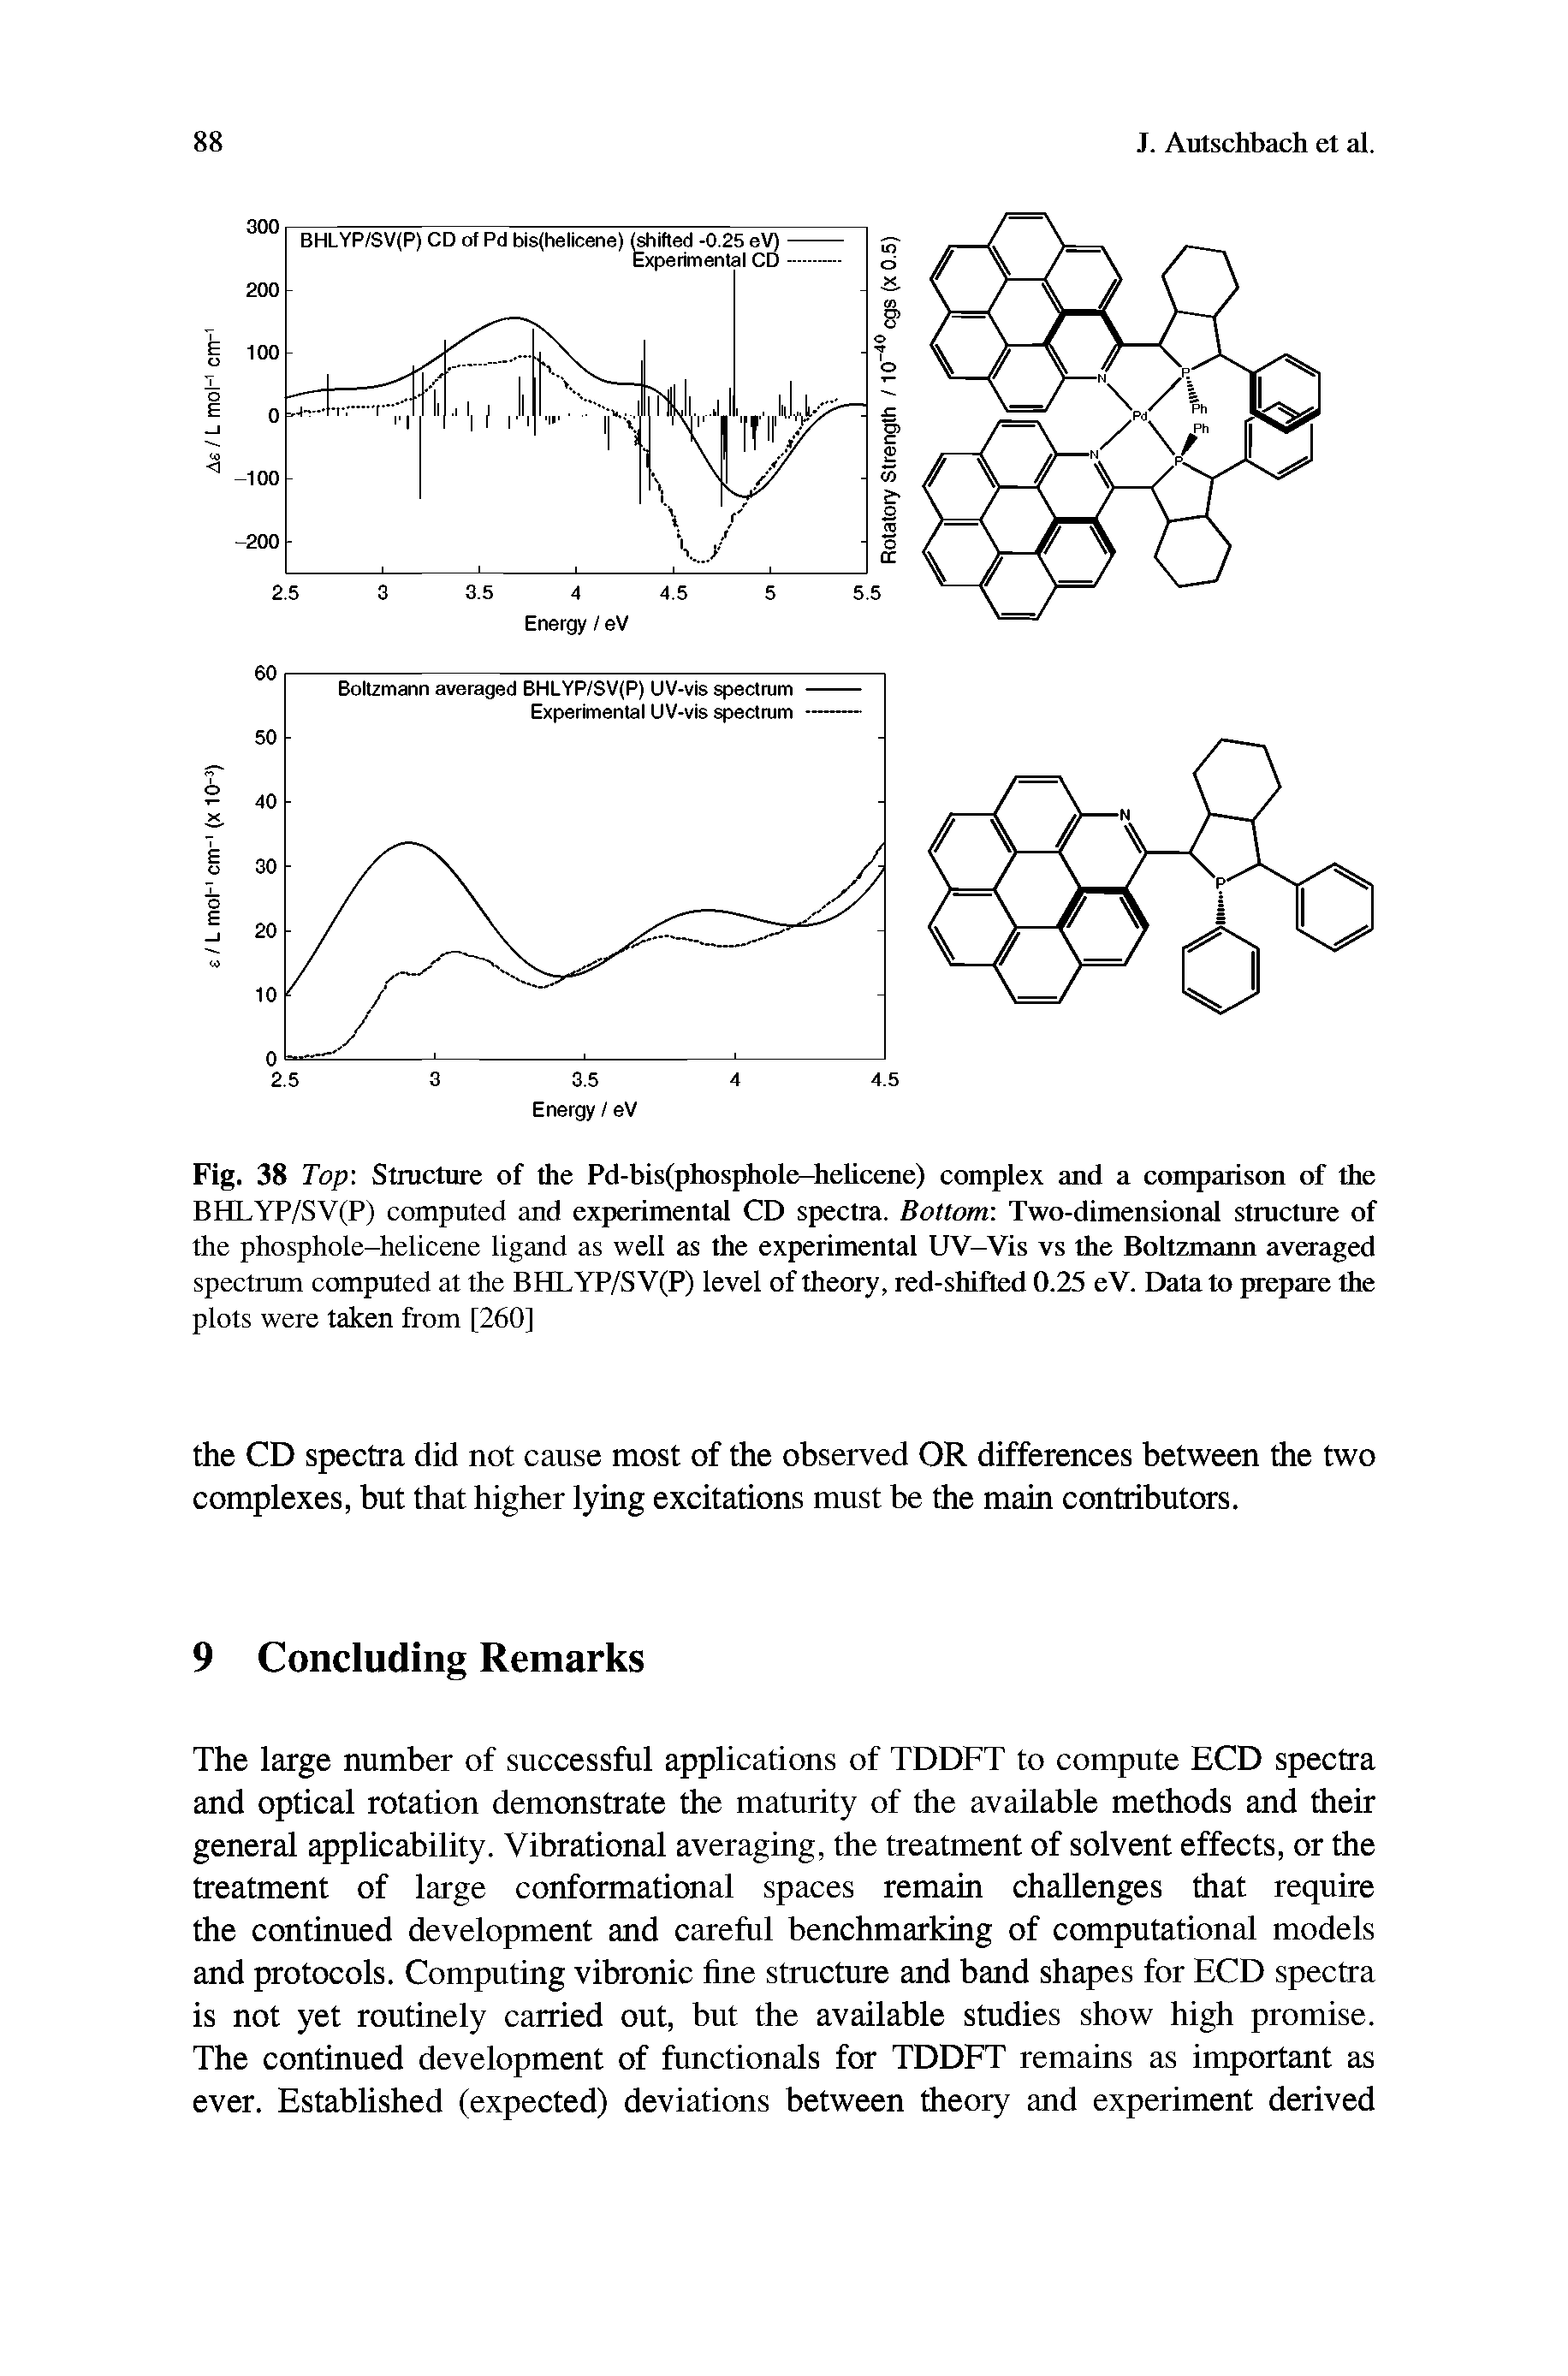 Fig. 38 Top Structure of the Pd-bis(phosphole-helicene) complex and a comparison of the BHLYP/SV(P) computed and experimental CD spectra. Bottom Two-dimensional structure of the phosphole-helicene ligand as well as the experimental UV-Vis vs the Boltzmann averaged spectrum computed at the BHLYP/SV(P) level of theory, red-shifted 0.25 eV. Data to prepare the plots were taken from [260]...